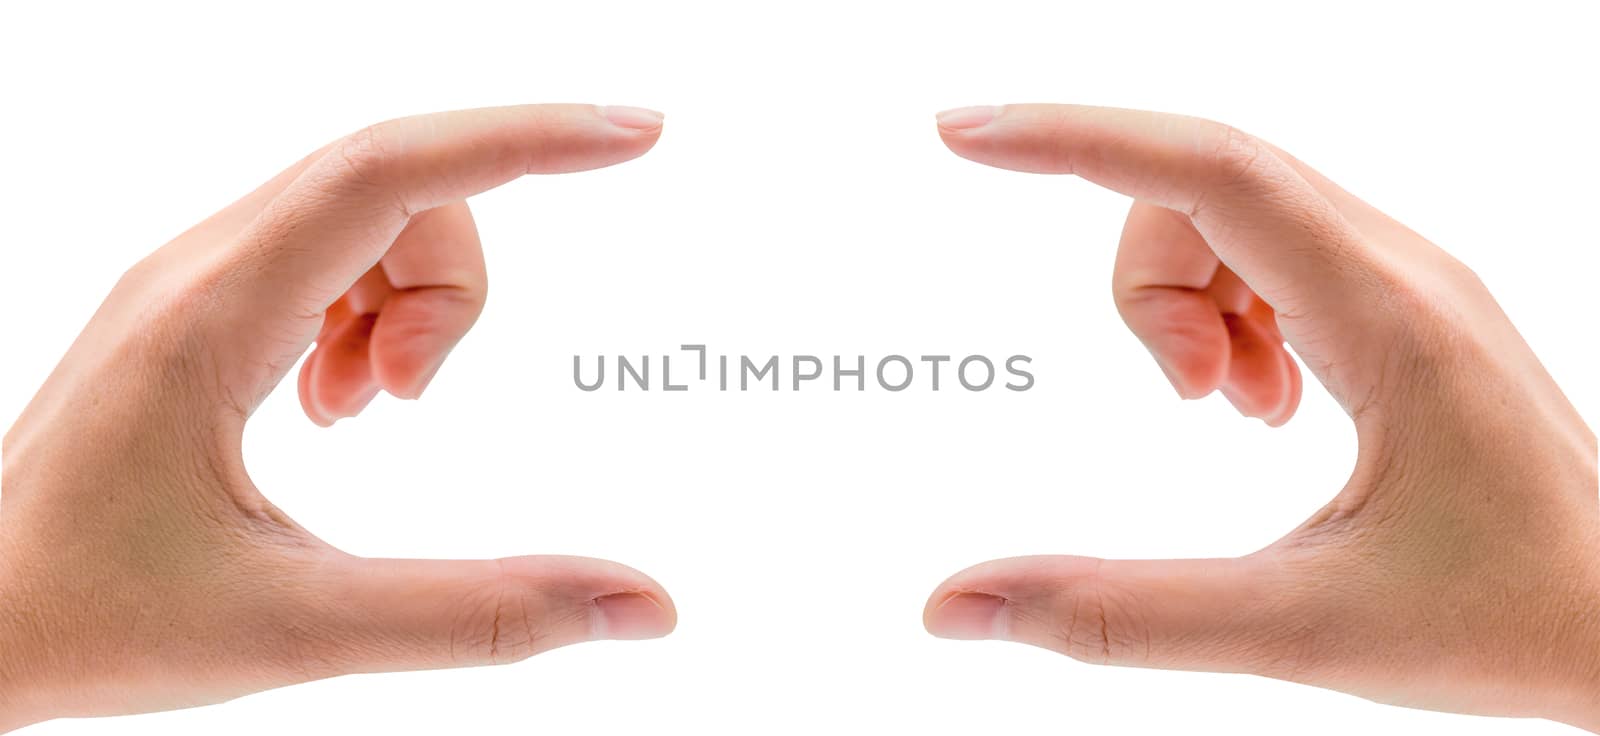 Man hands holding or pressing something isolated on white background